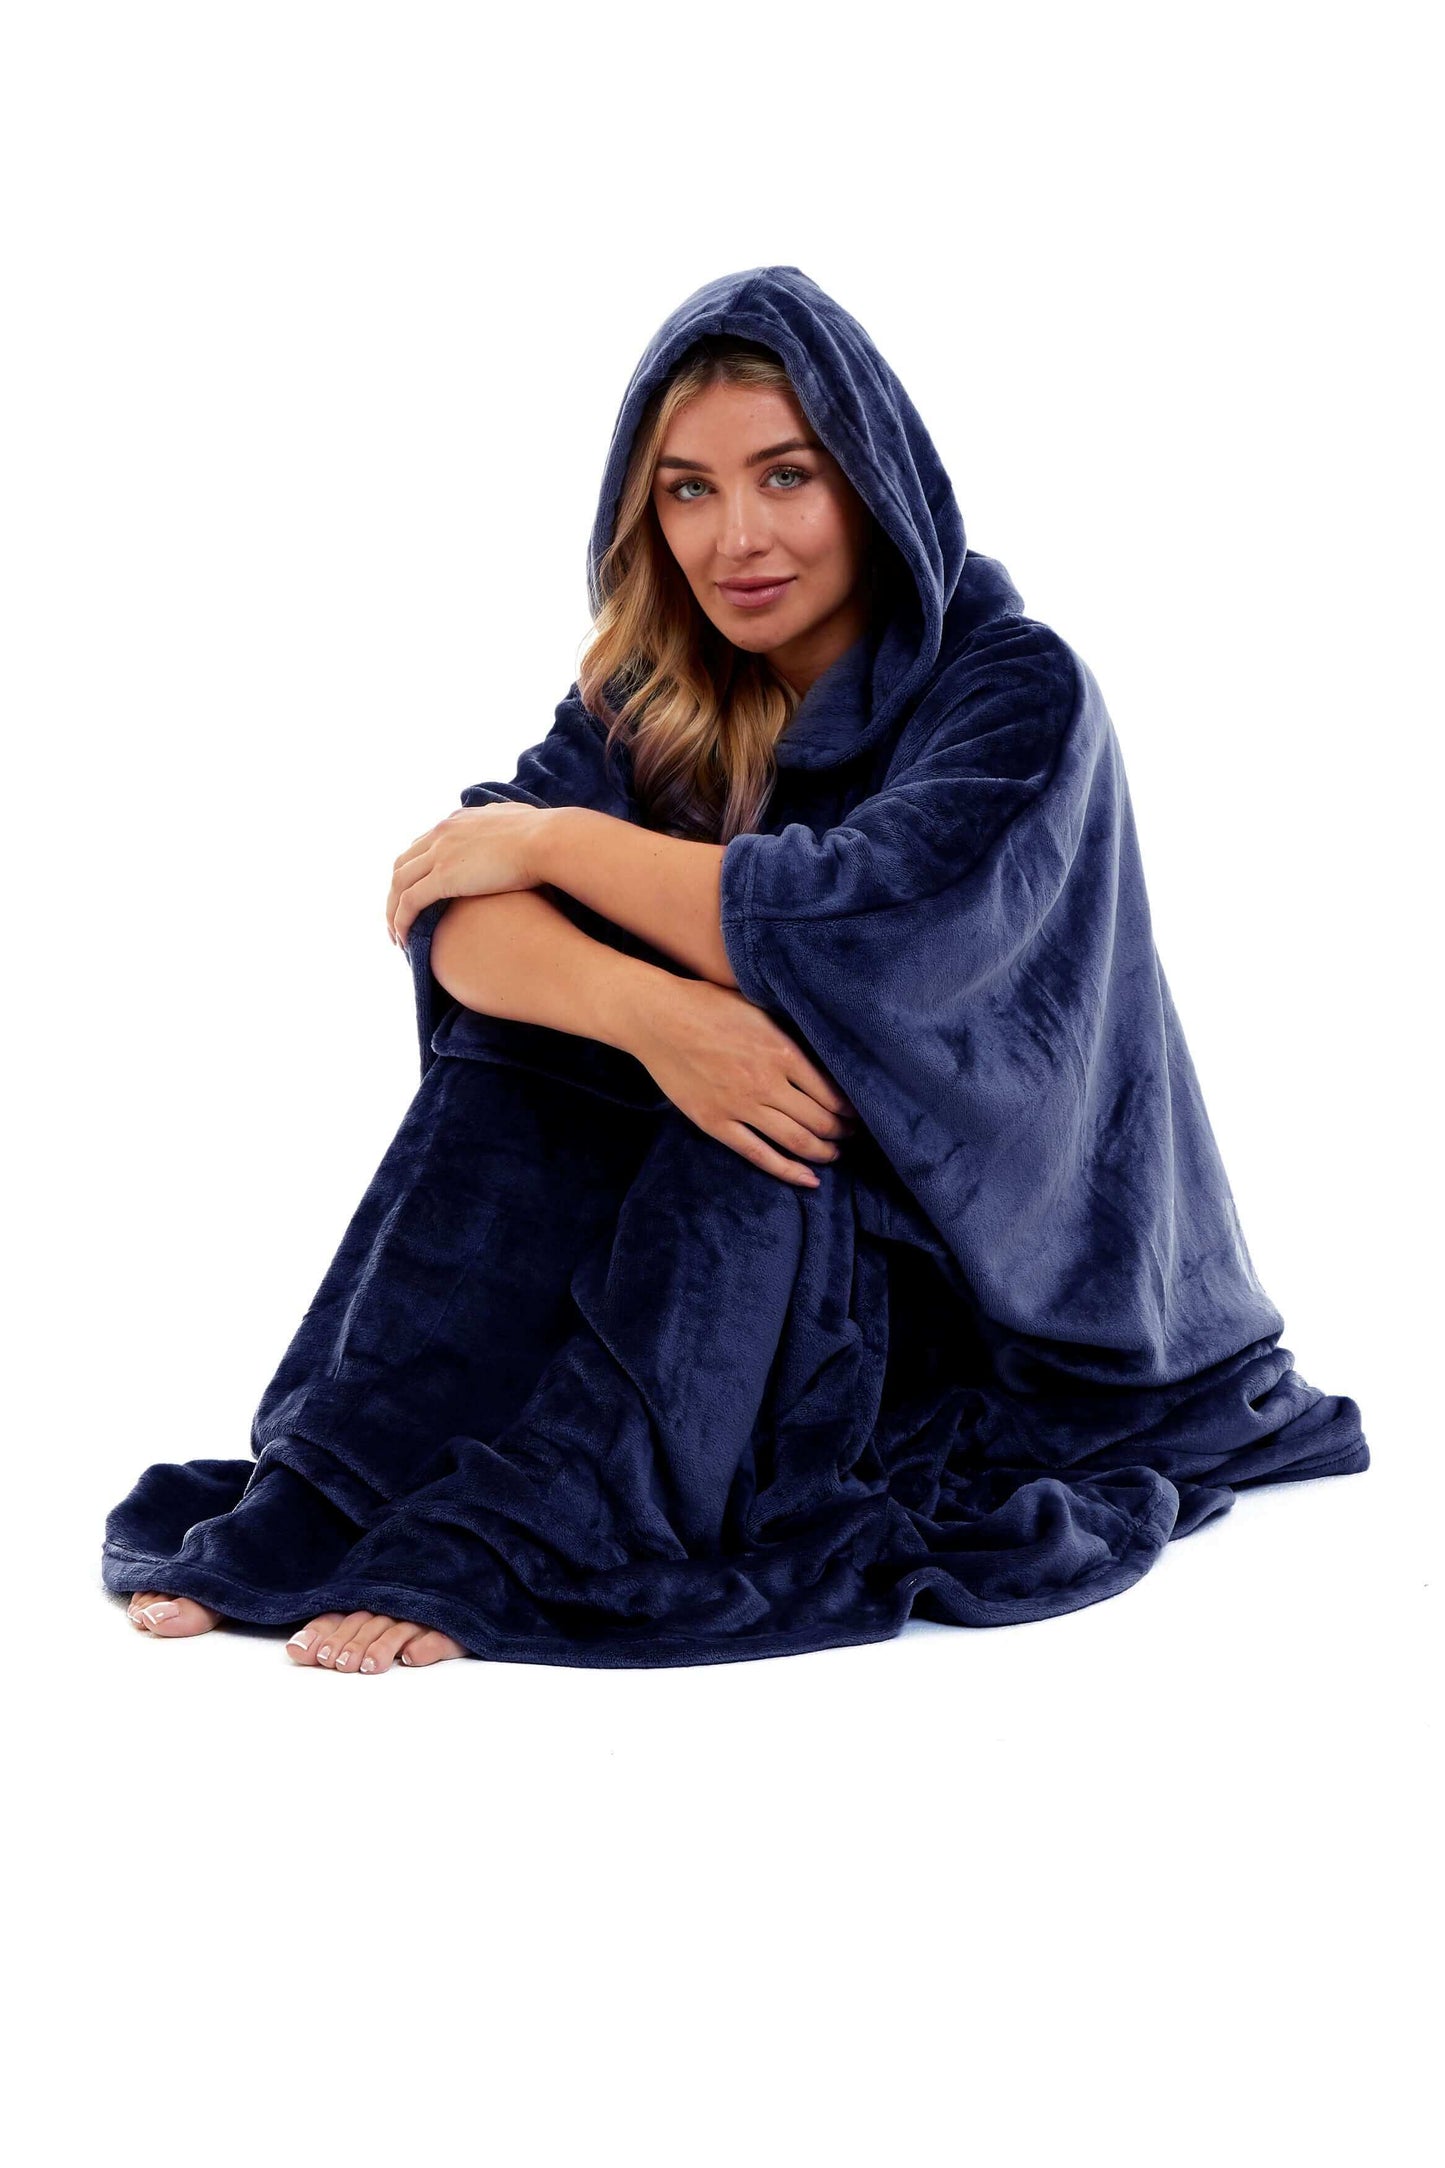 Women's Oversized Hooded Poncho Blanket, Navy & Charcoal. Buy now for £20.00. A Hooded Blanket by Daisy Dreamer. charcoal, clothing, comfortable, cosy, designer, dressing, flannel, fleece, fluffy, formal wear, girls, hooded, hooded blanket, hooded robe, h